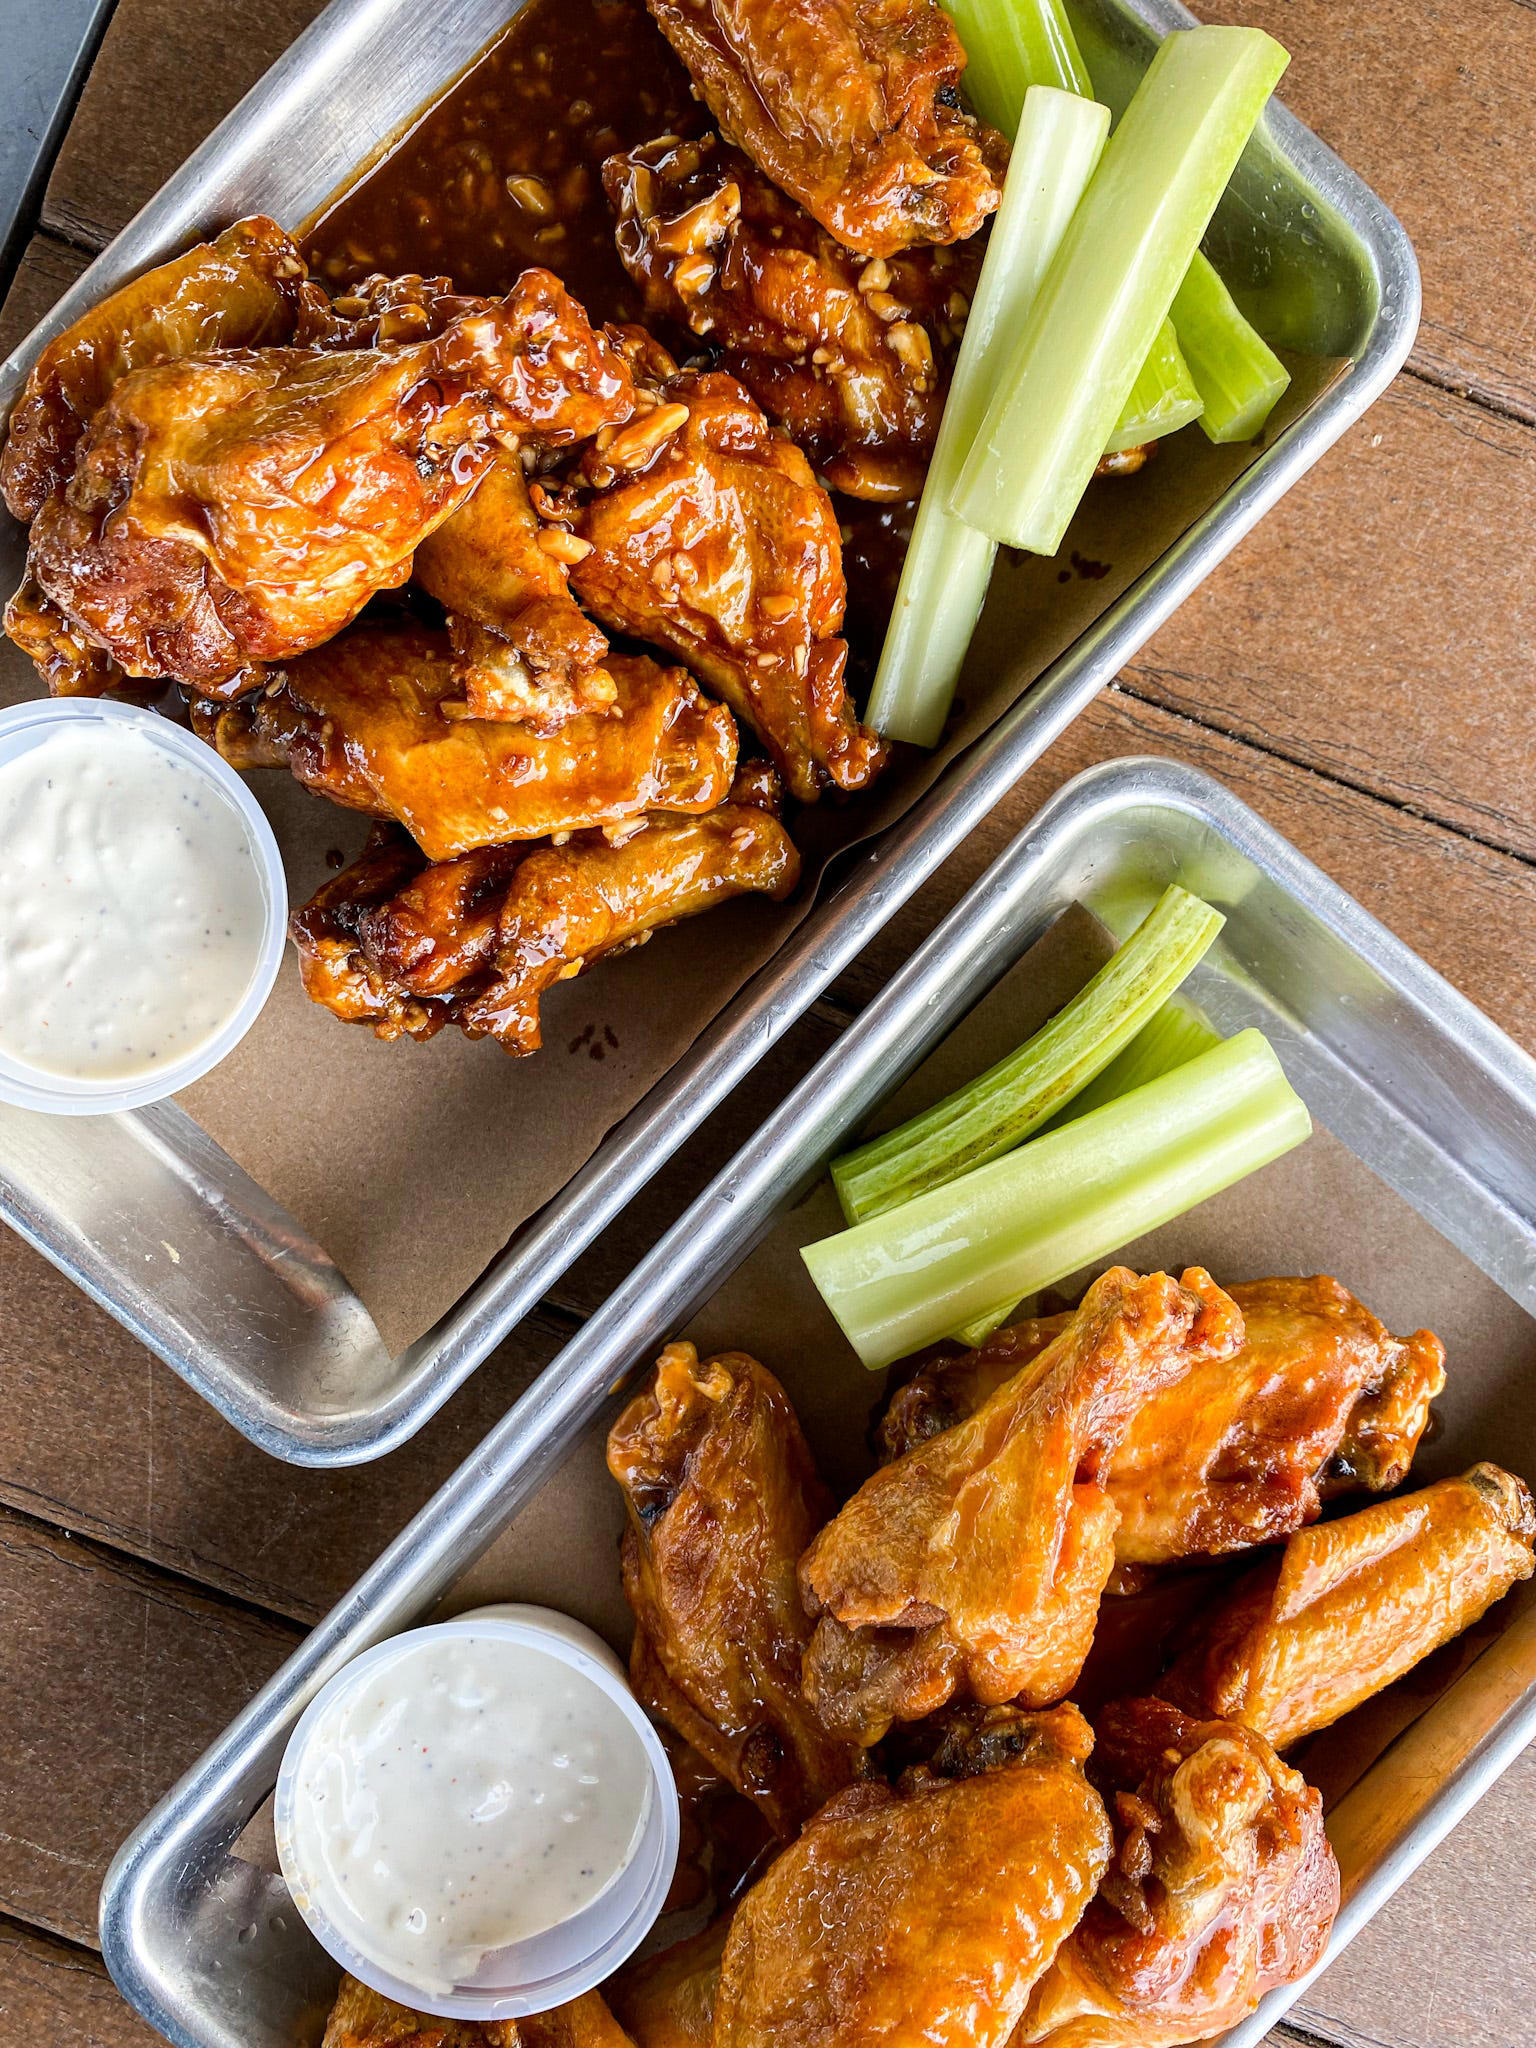 Celebrate chicken wings at the South Florida Wing Bash this weekend